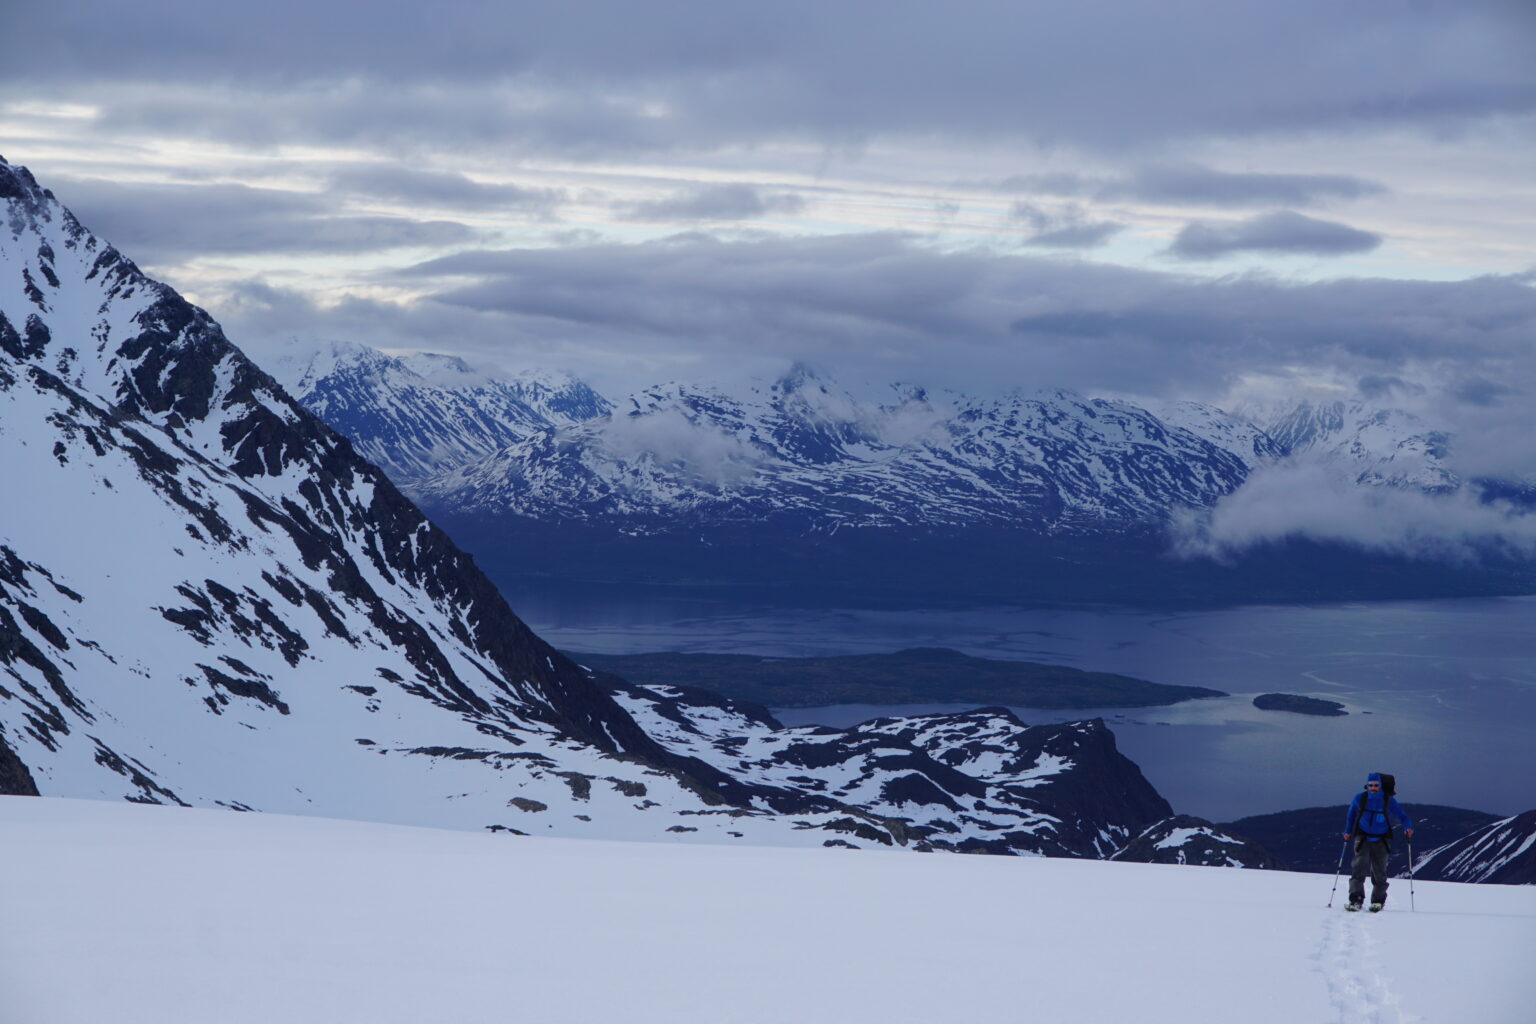 Ski touring up Strupbeen Glacier with the Lyngen Fjord in the distance